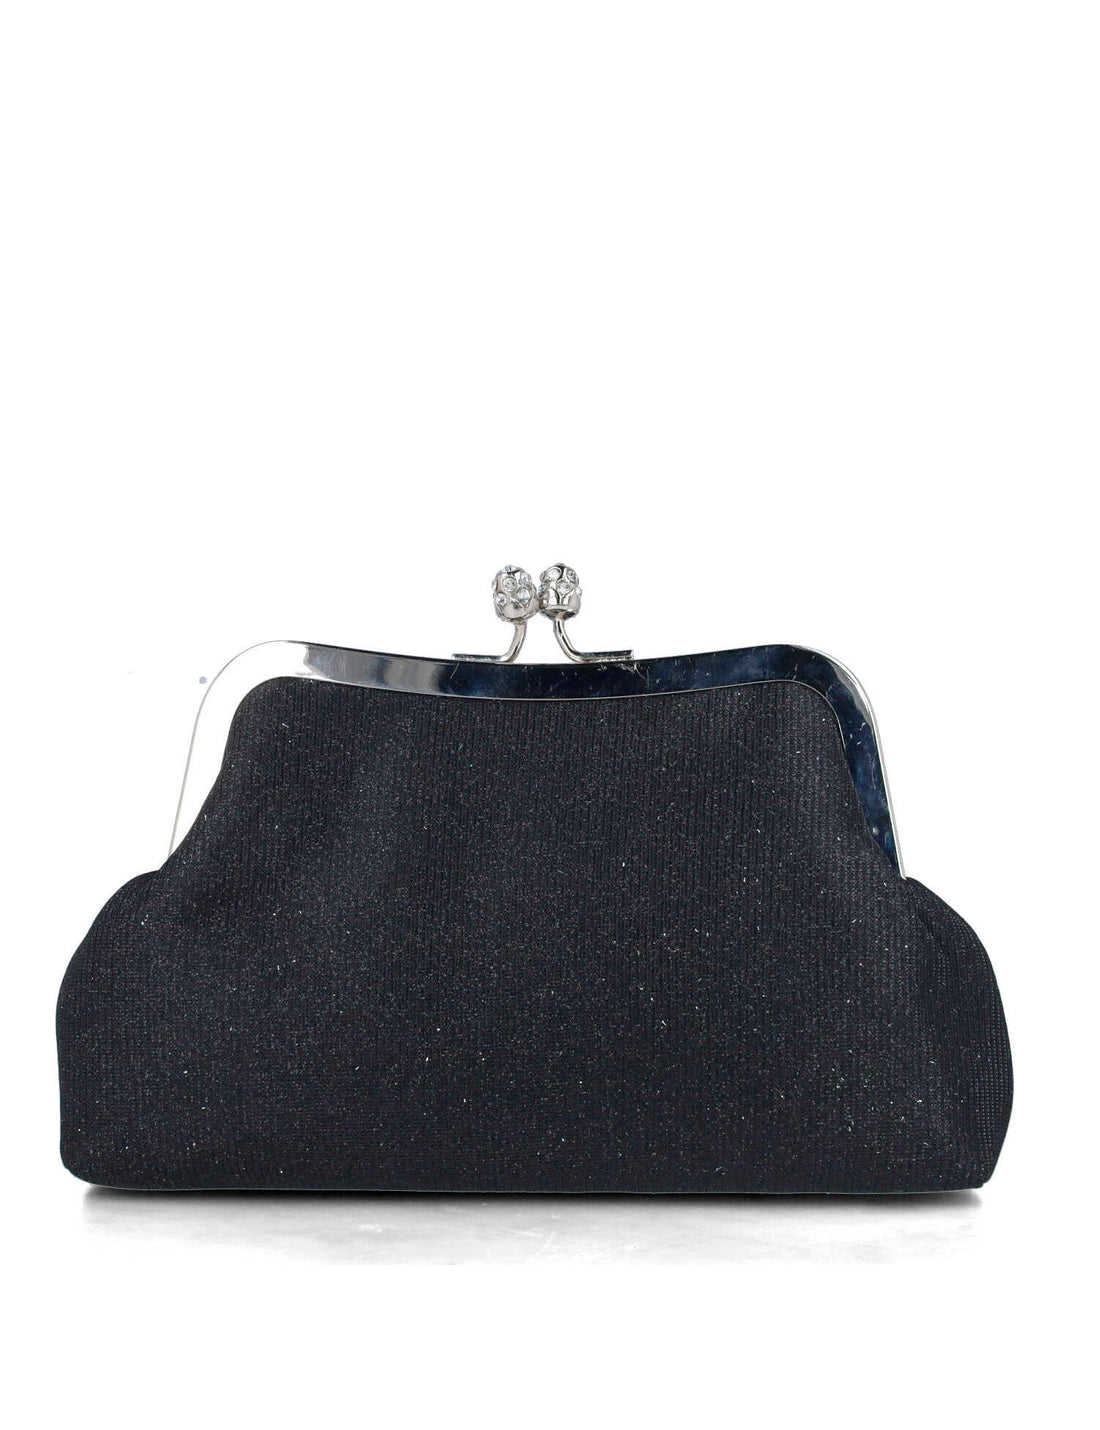 Pouch Style Clutch_85630_01_01